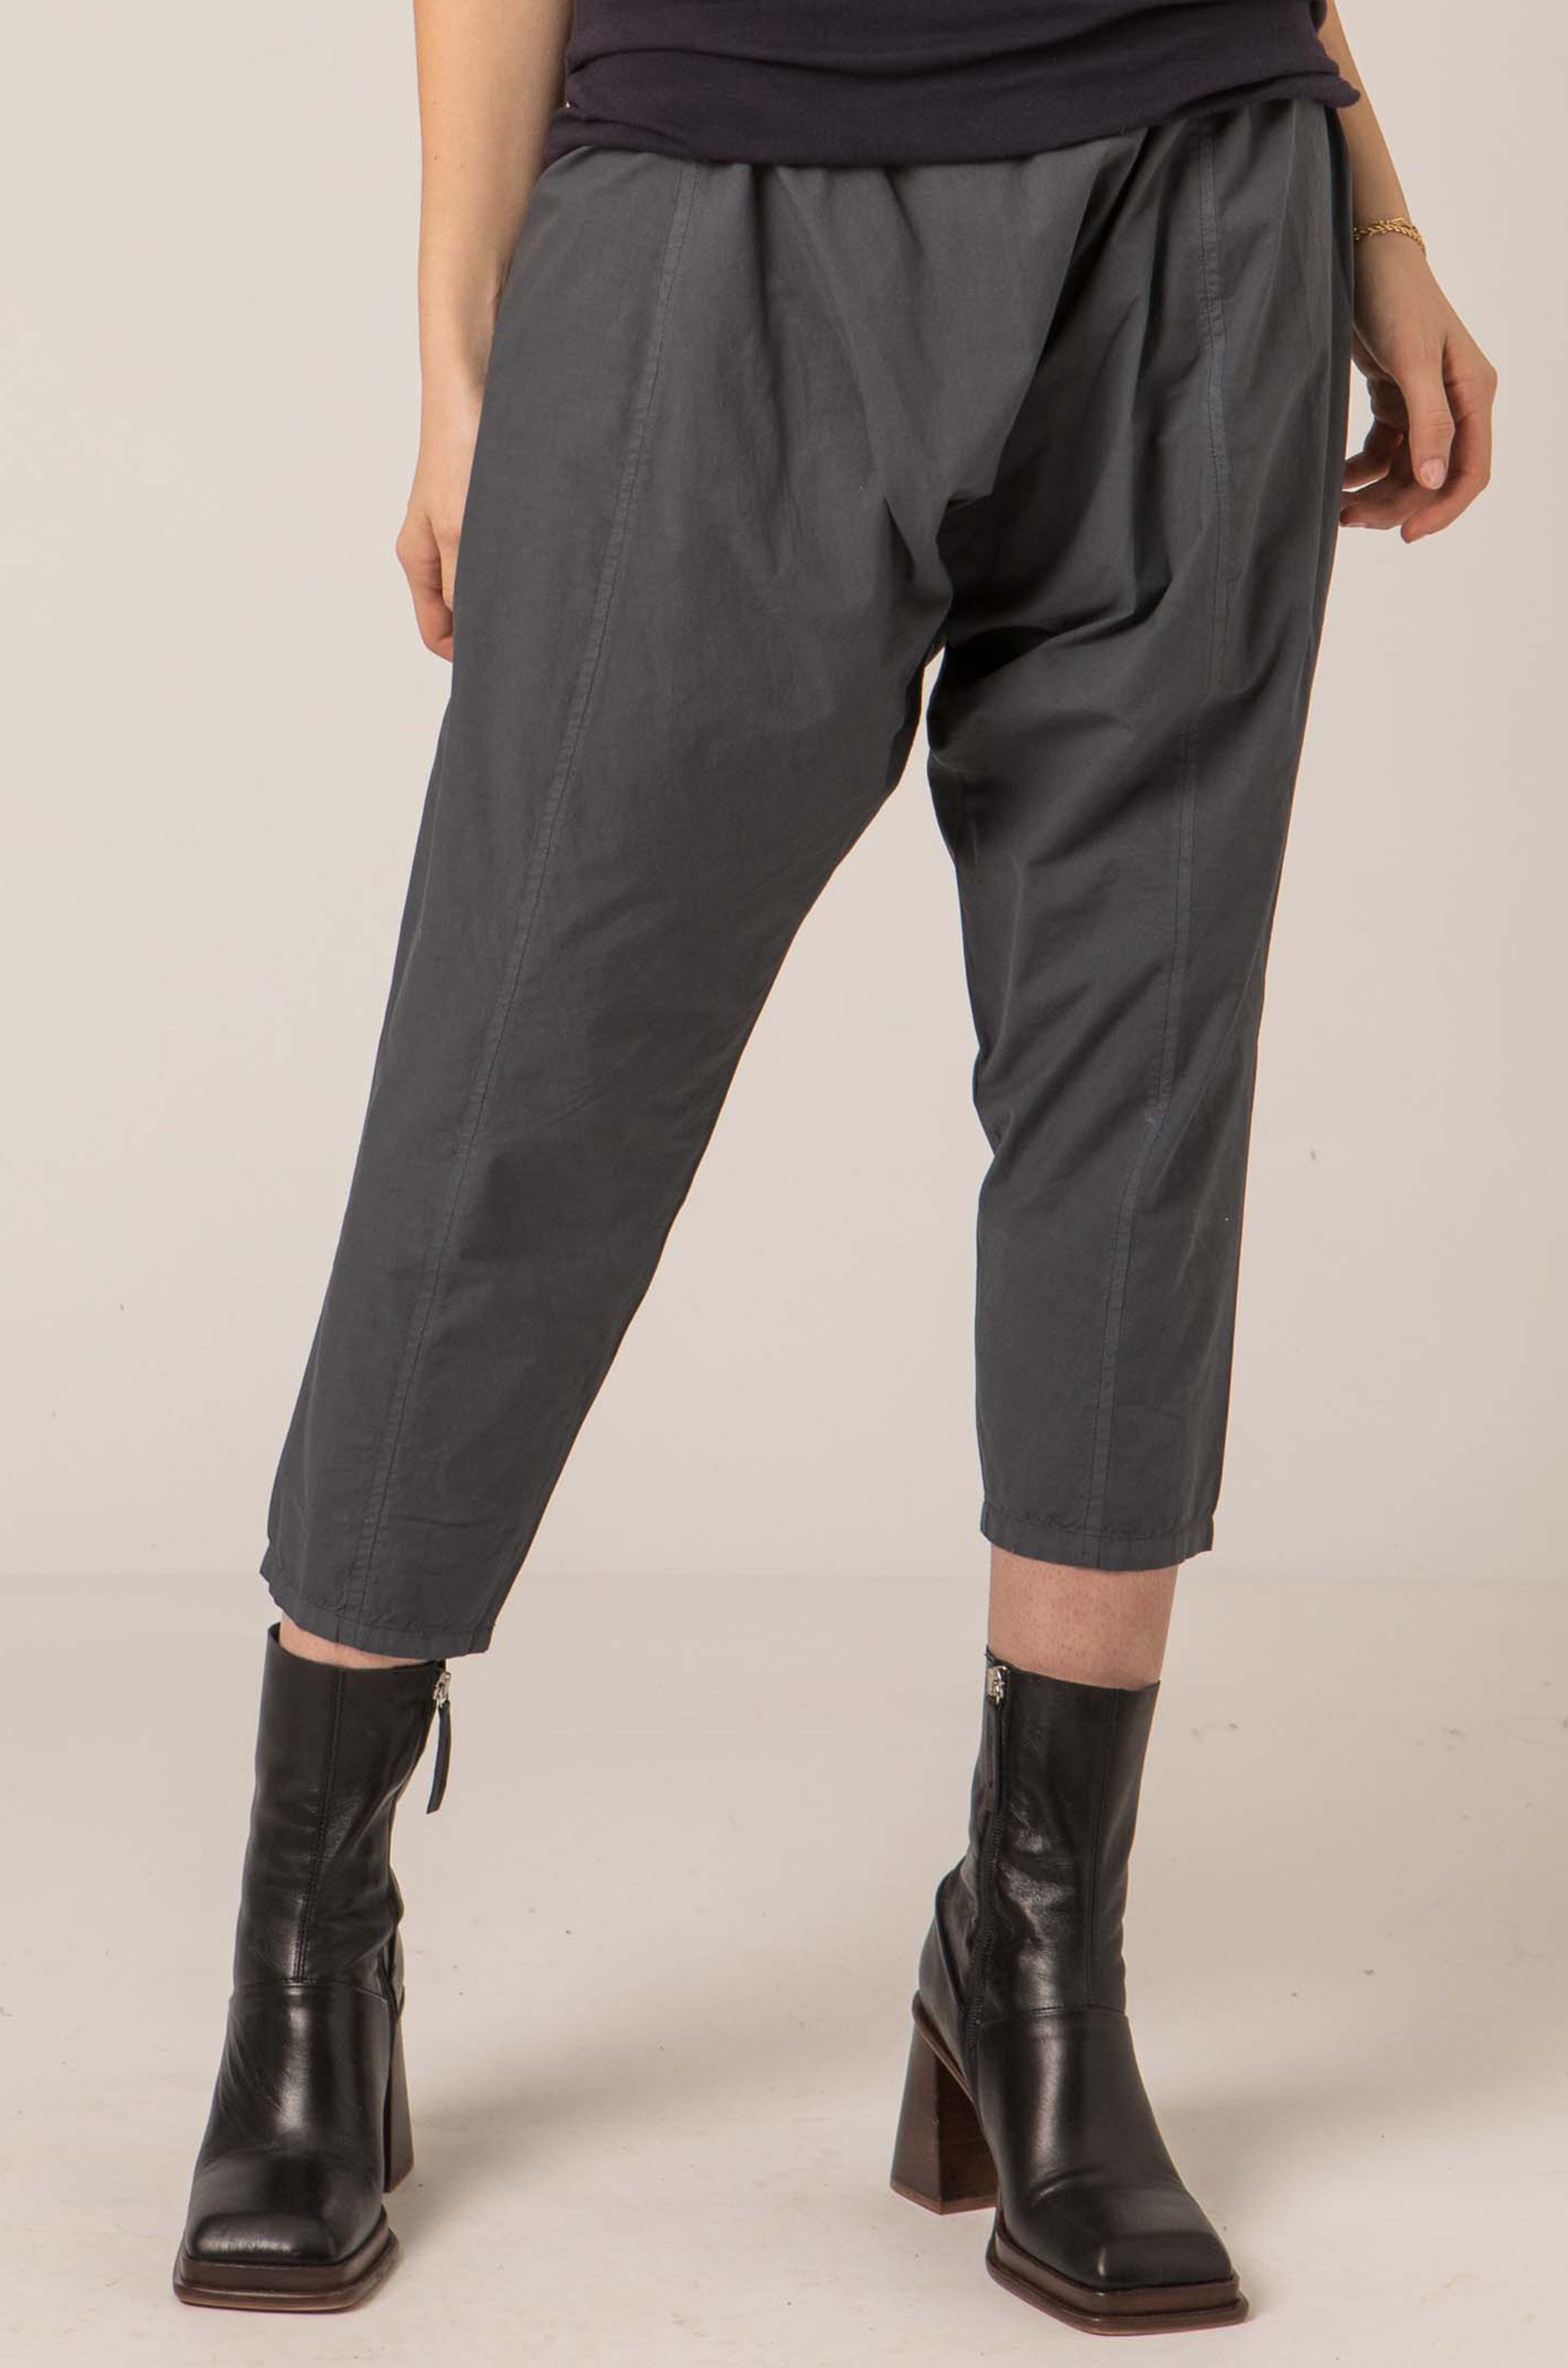 Hareem Pant in Charcoal, Charcoal / 1